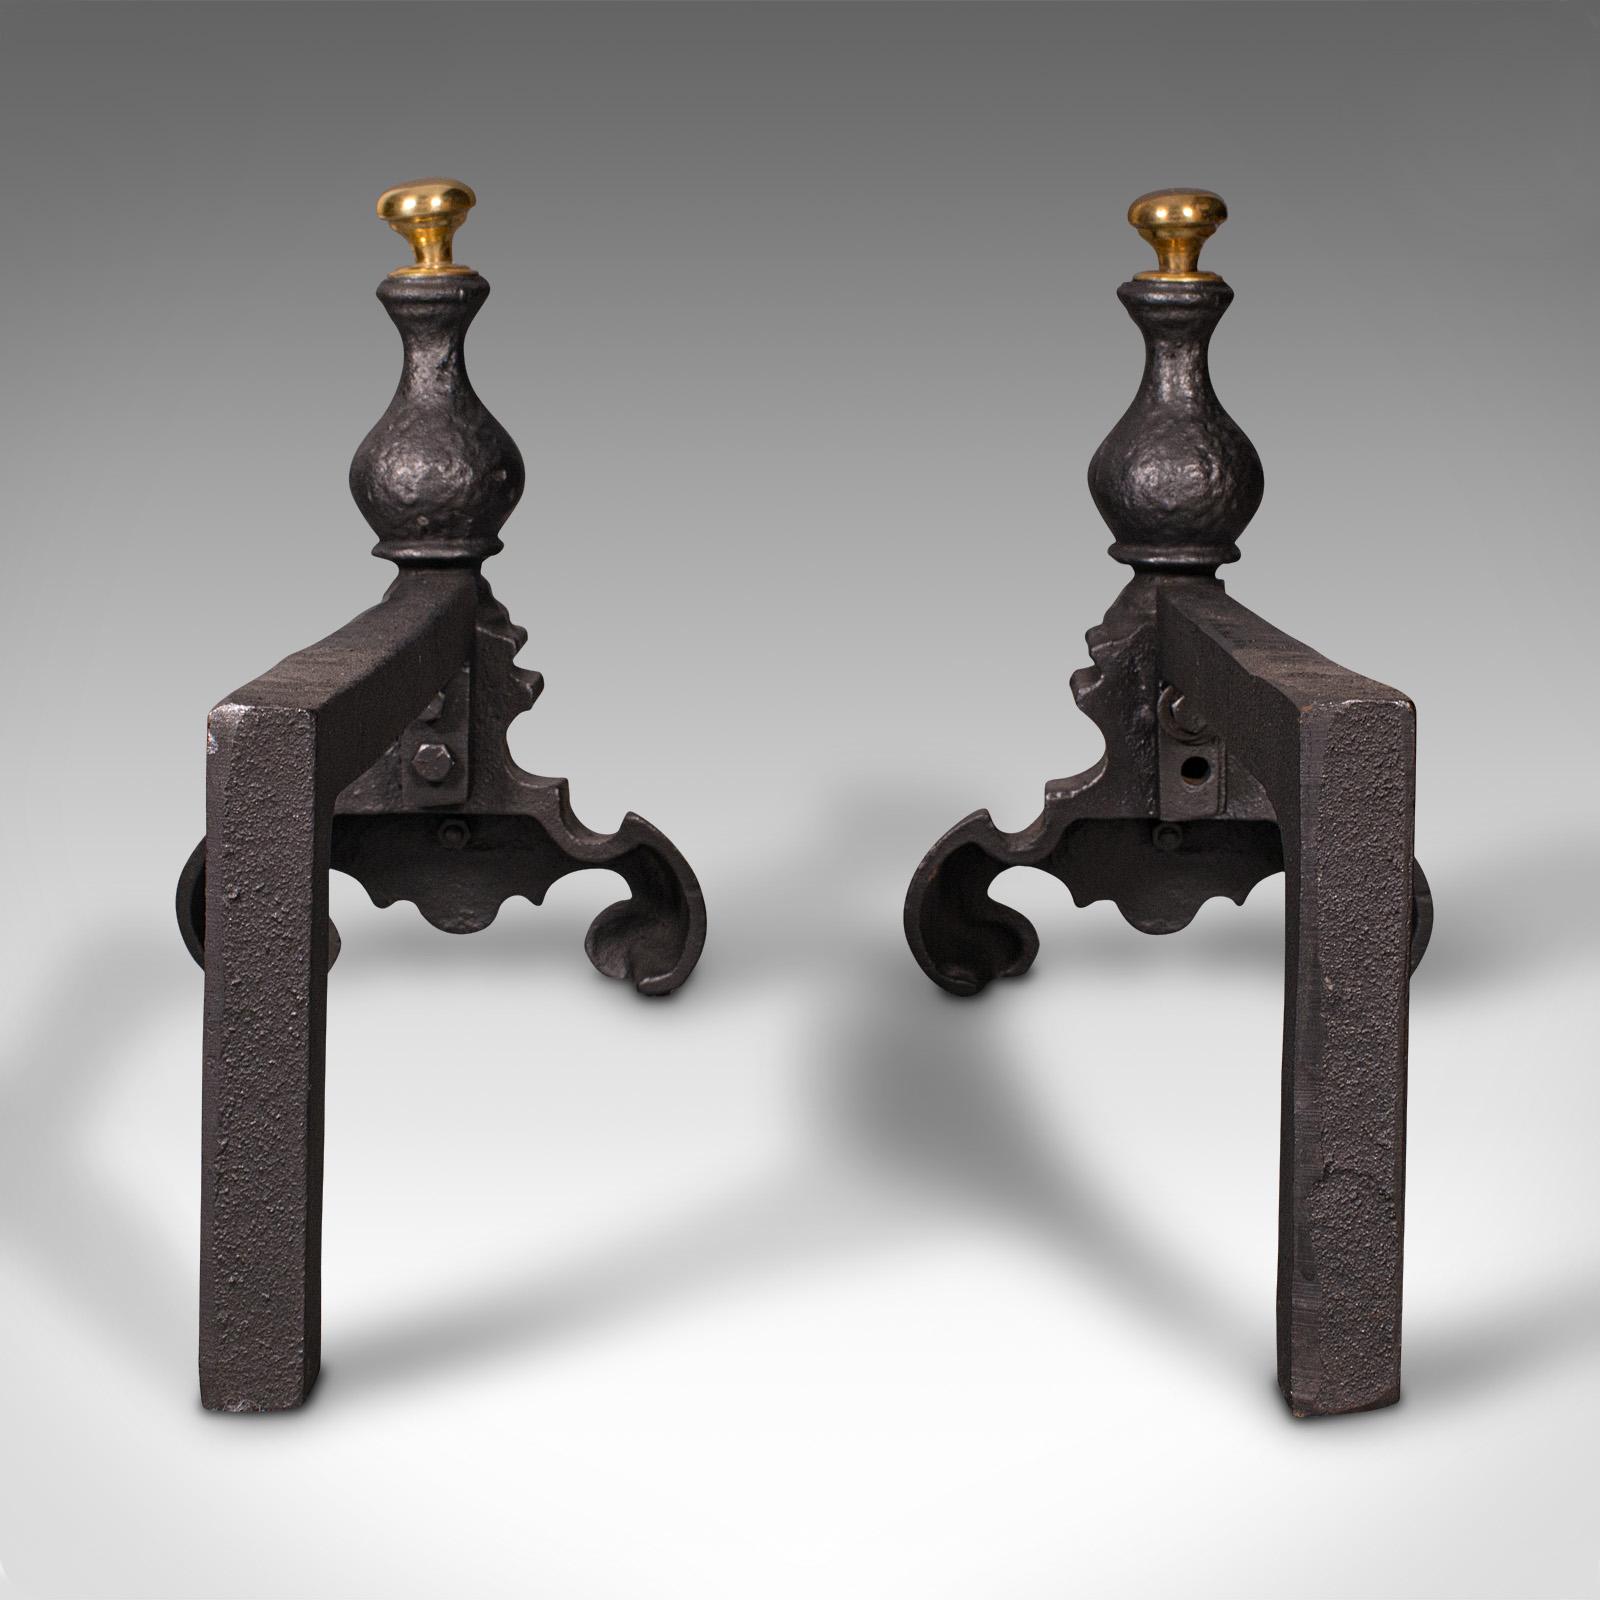 British Pair Of Antique Decorative Fire Rests, English Fireside Andiron, Victorian, 1850 For Sale